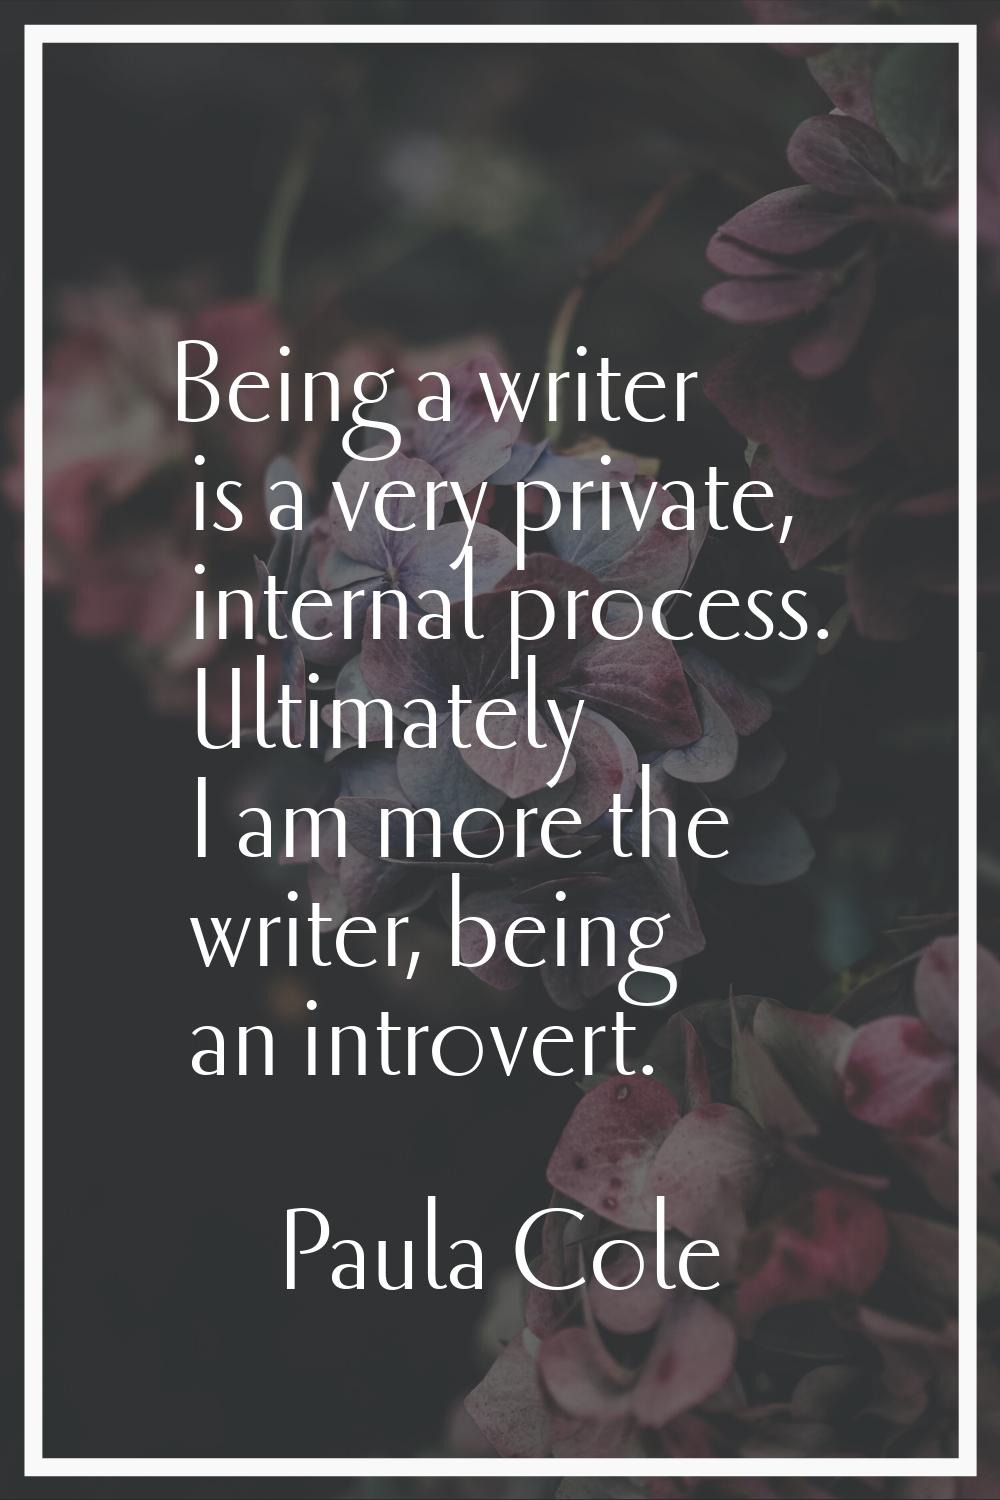 Being a writer is a very private, internal process. Ultimately I am more the writer, being an intro